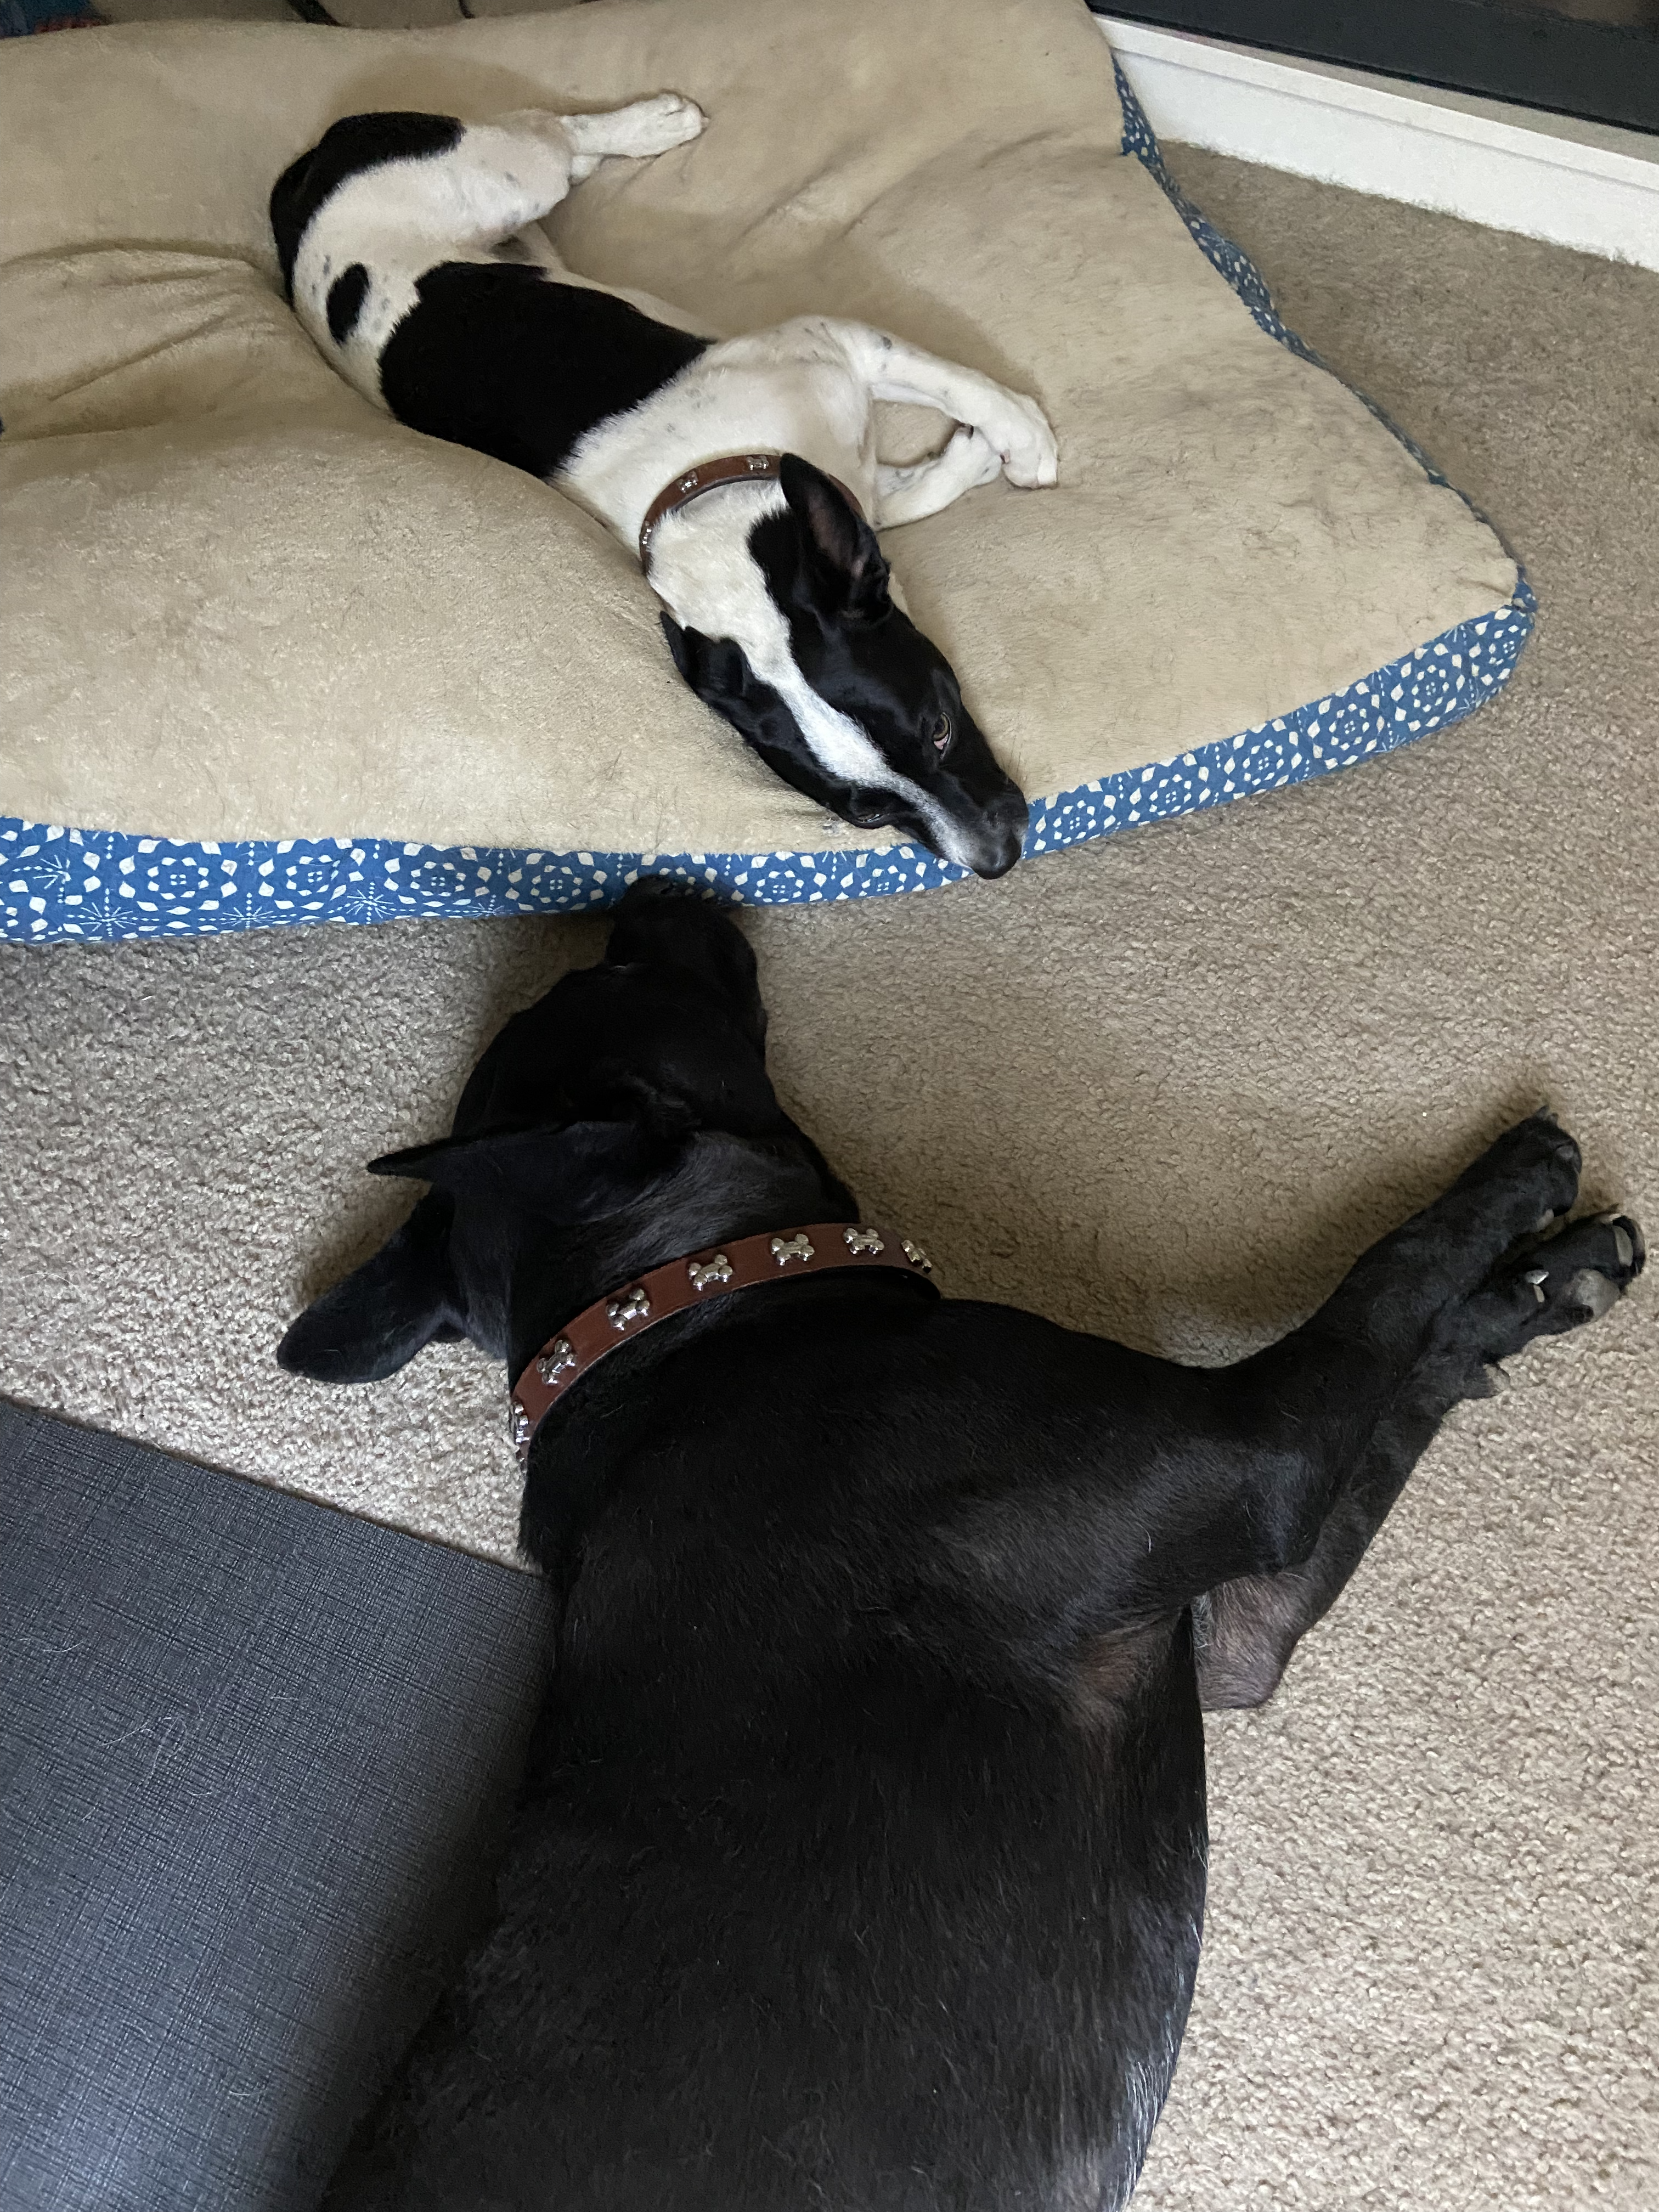 Two dogs lying together